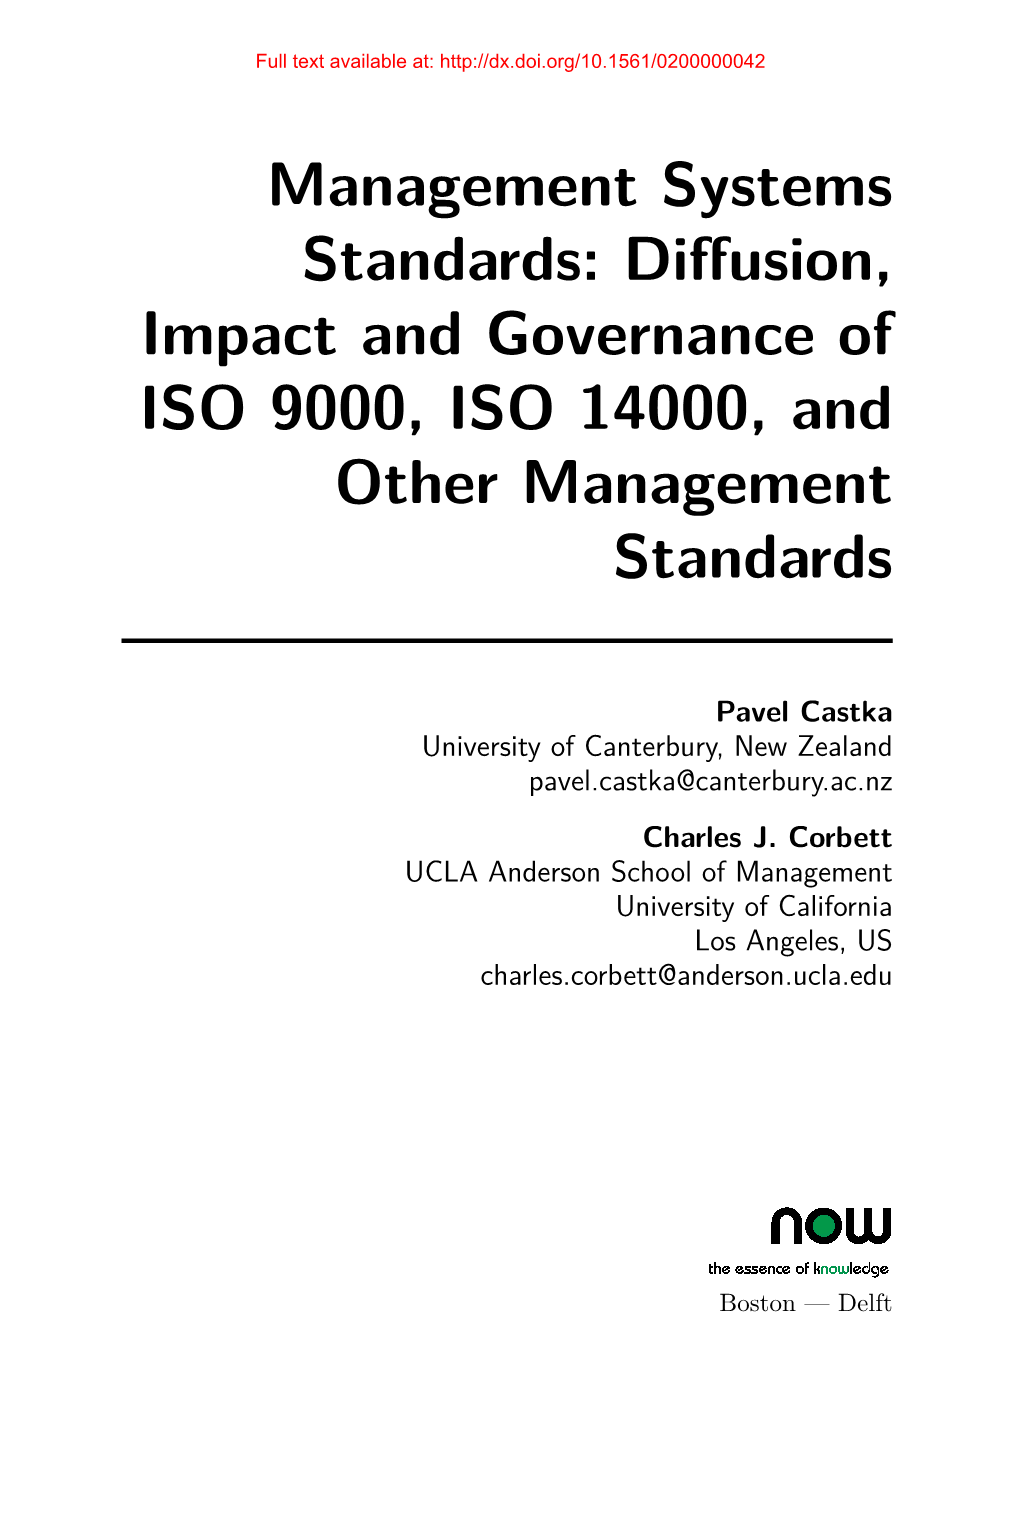 Diffusion, Impact and Governance of ISO 9000, ISO 14000, and Other